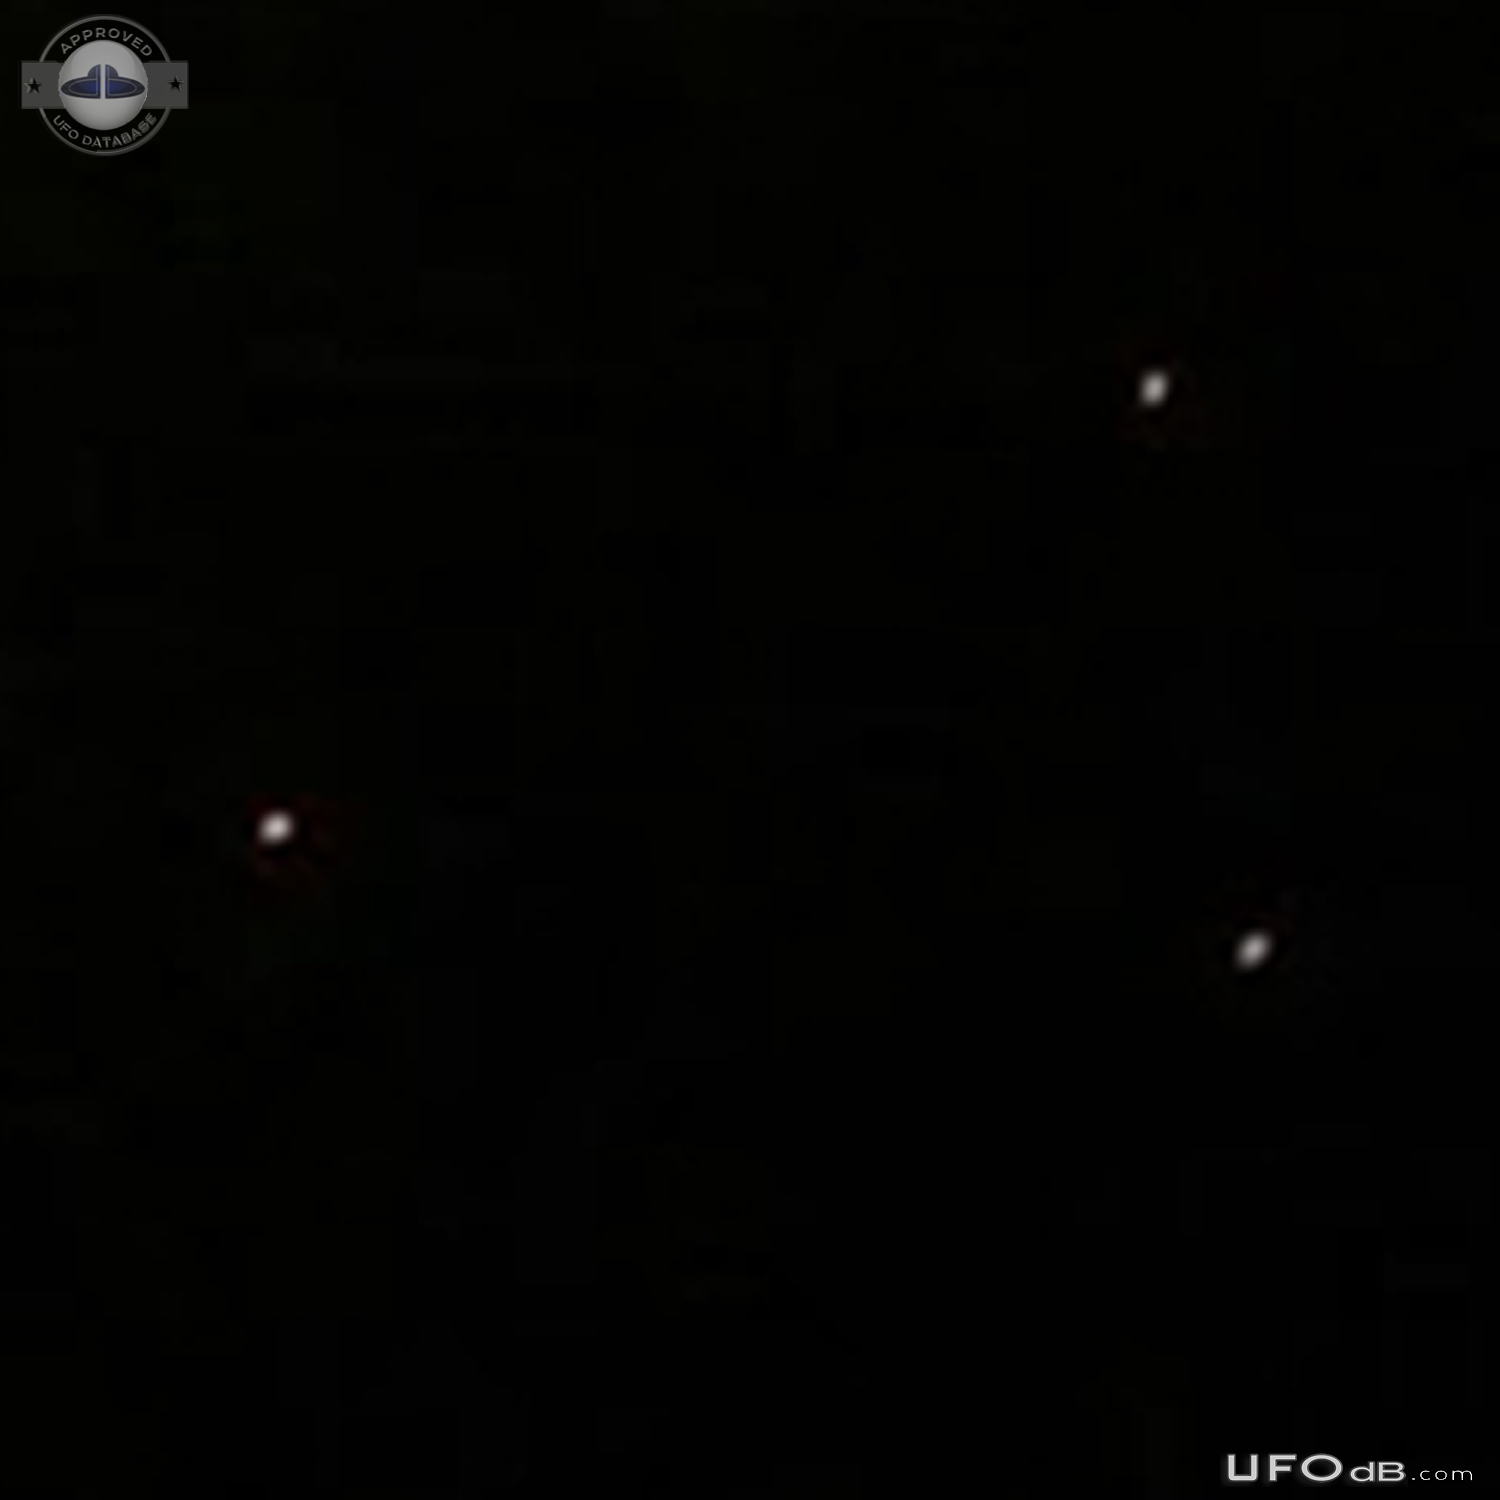 UFO Lights in triangle formation on picture - North Bay Ontario - 2015 UFO Picture #694-5